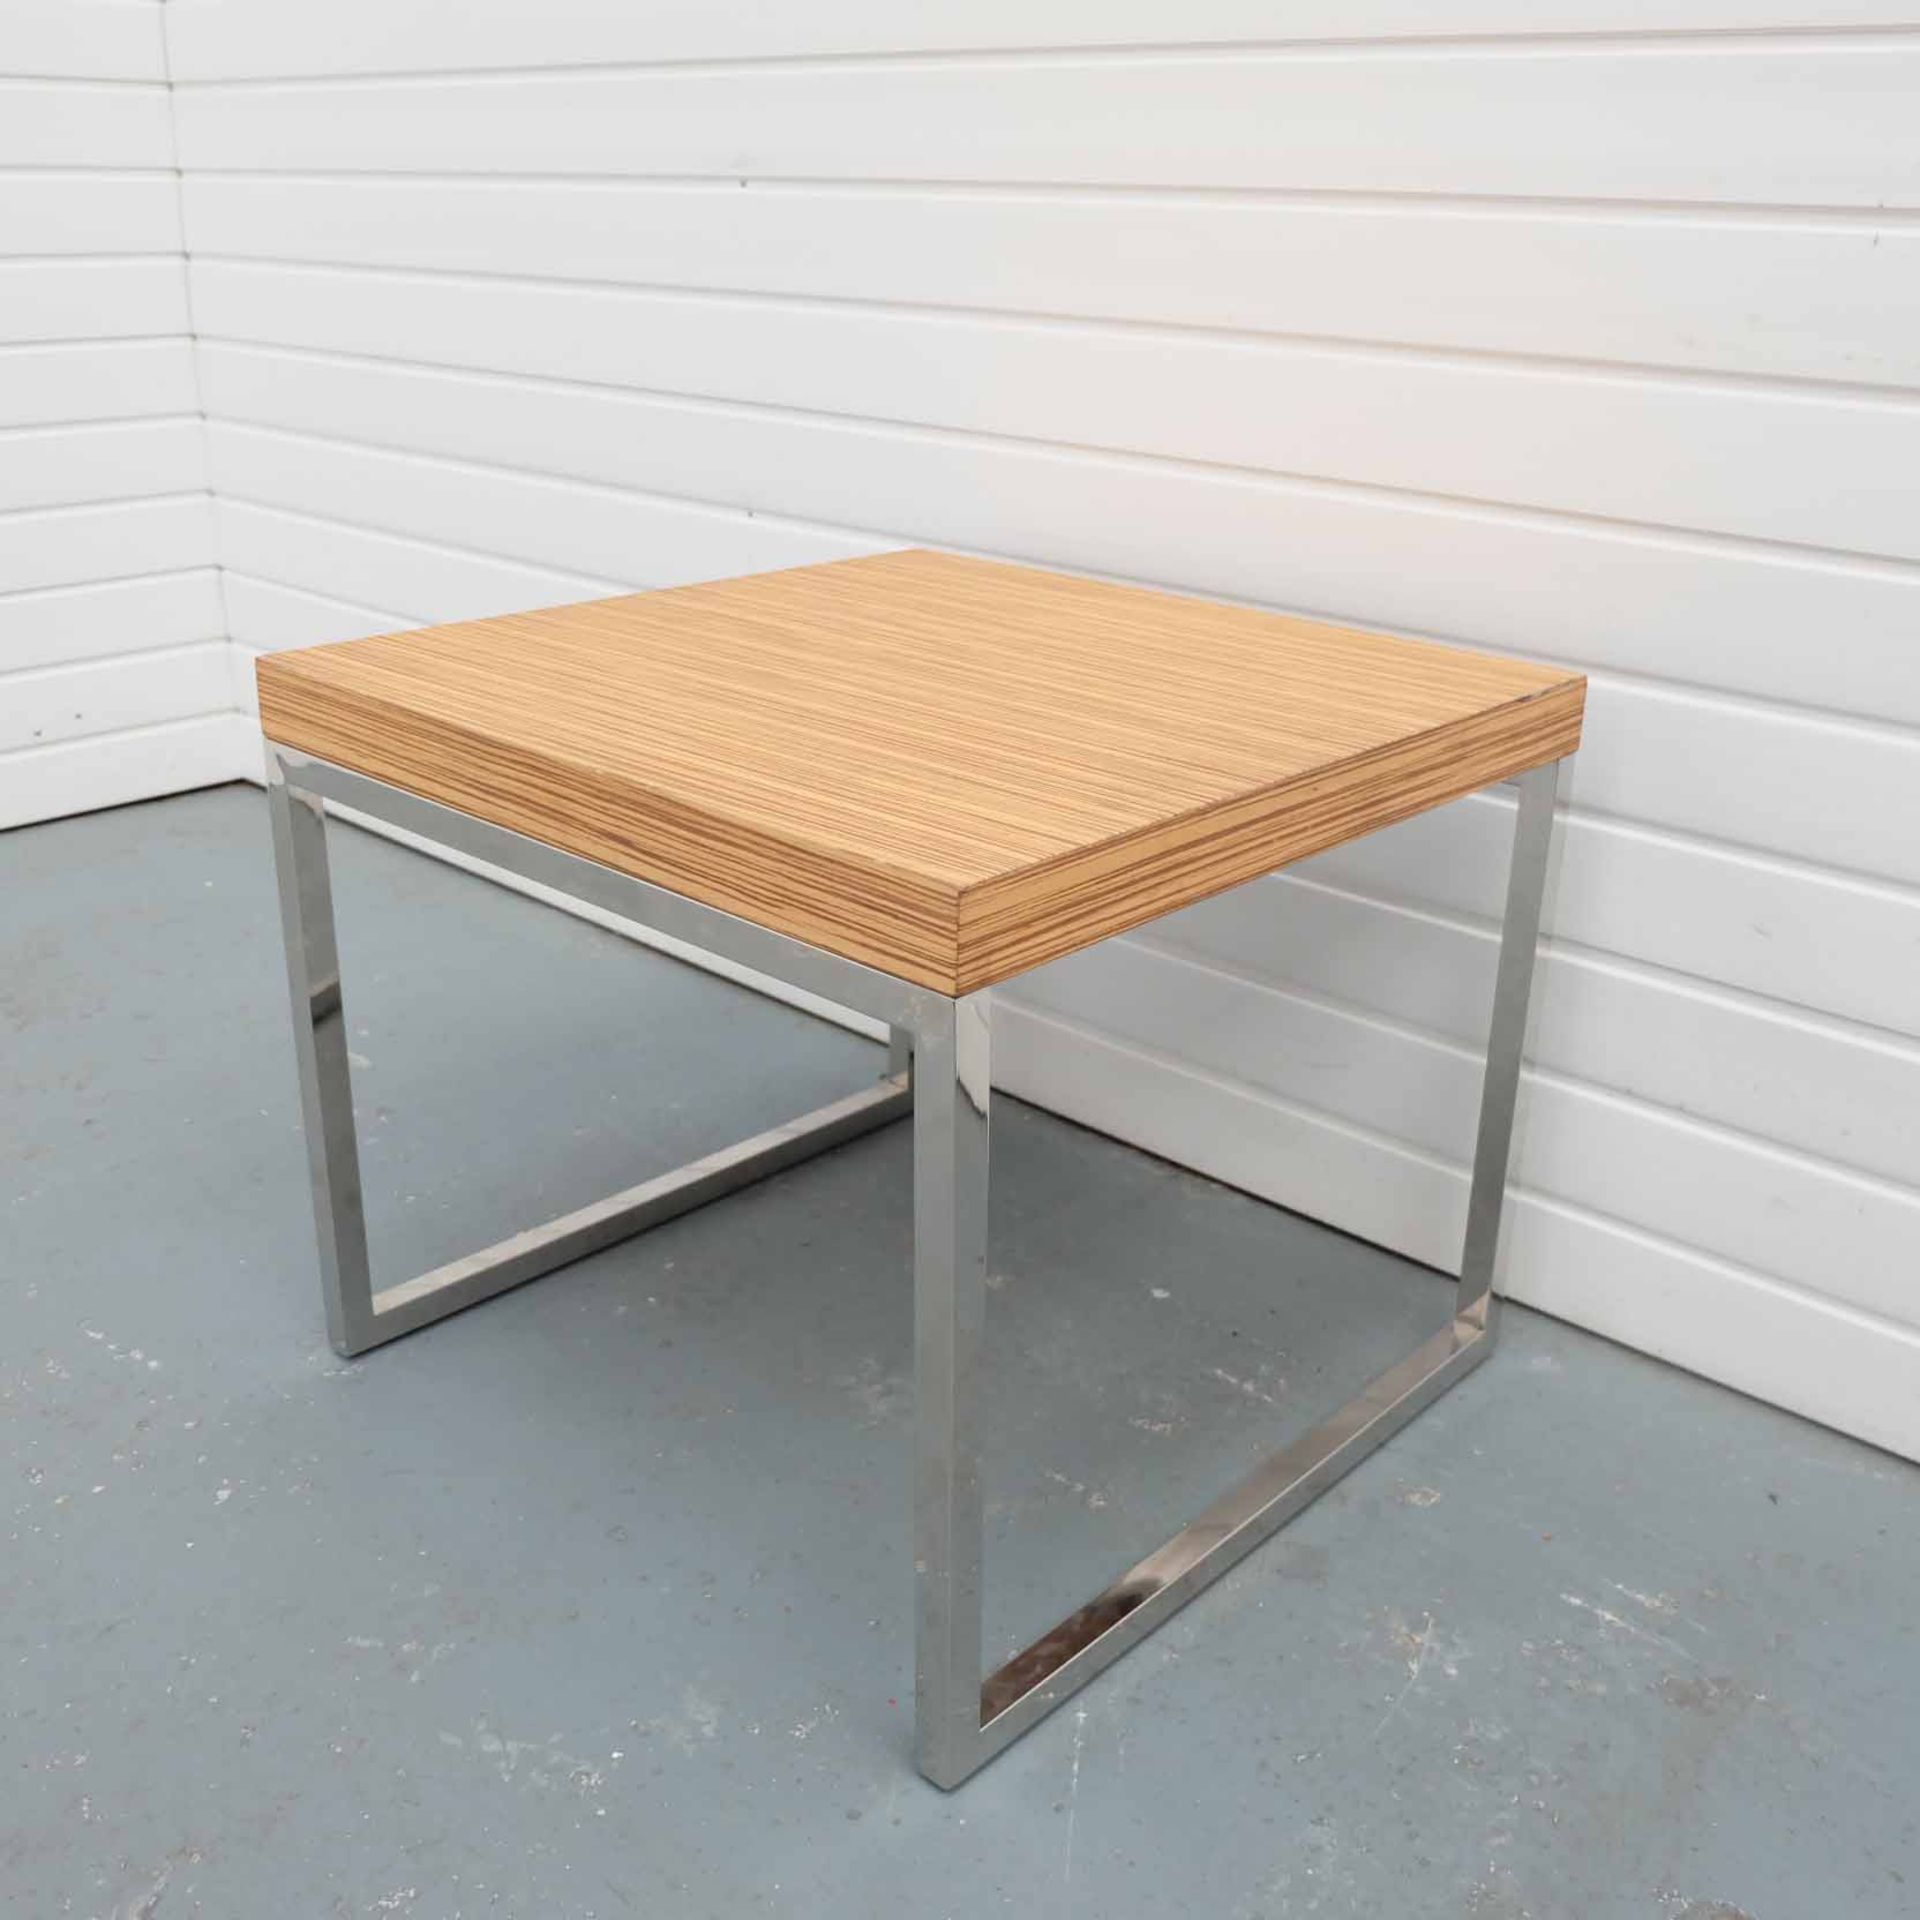 Modern Square Side Table. - Image 2 of 3